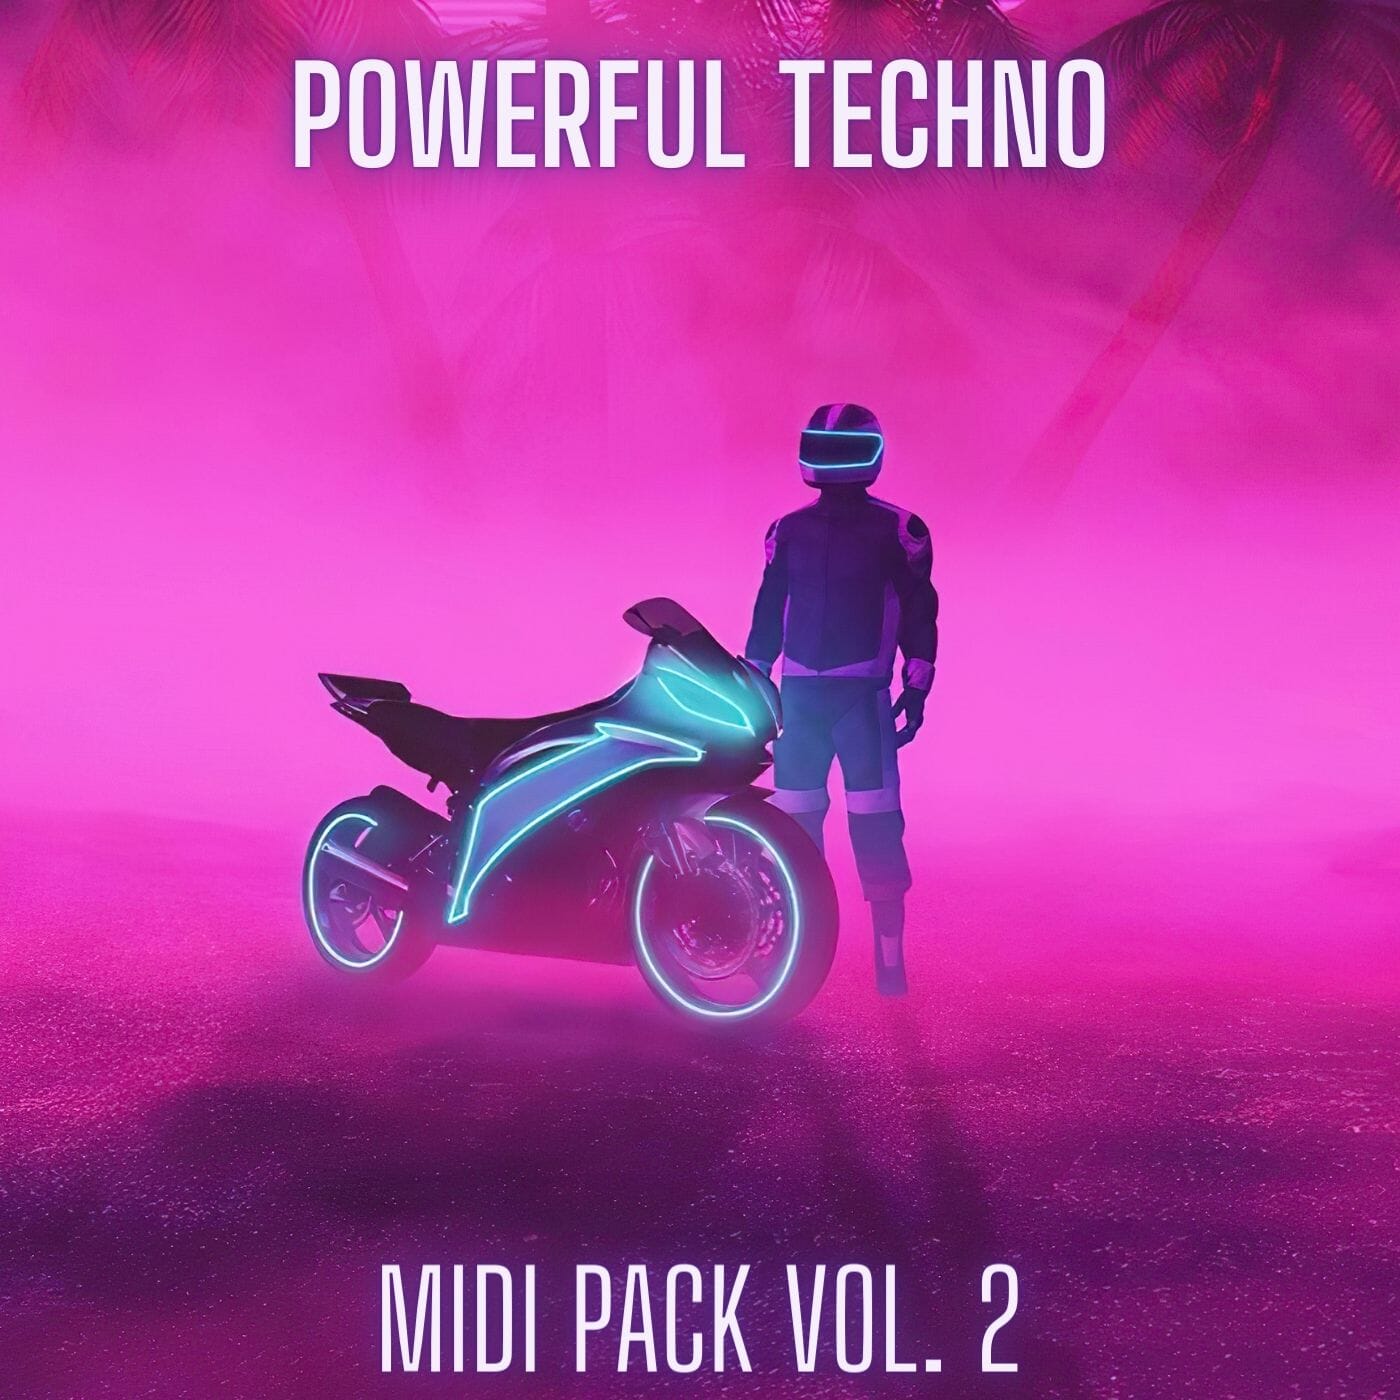 Powerful Techno Midi Pack Vol. 2 (Midi & Wave Loops) Sample Pack Innovation Sounds